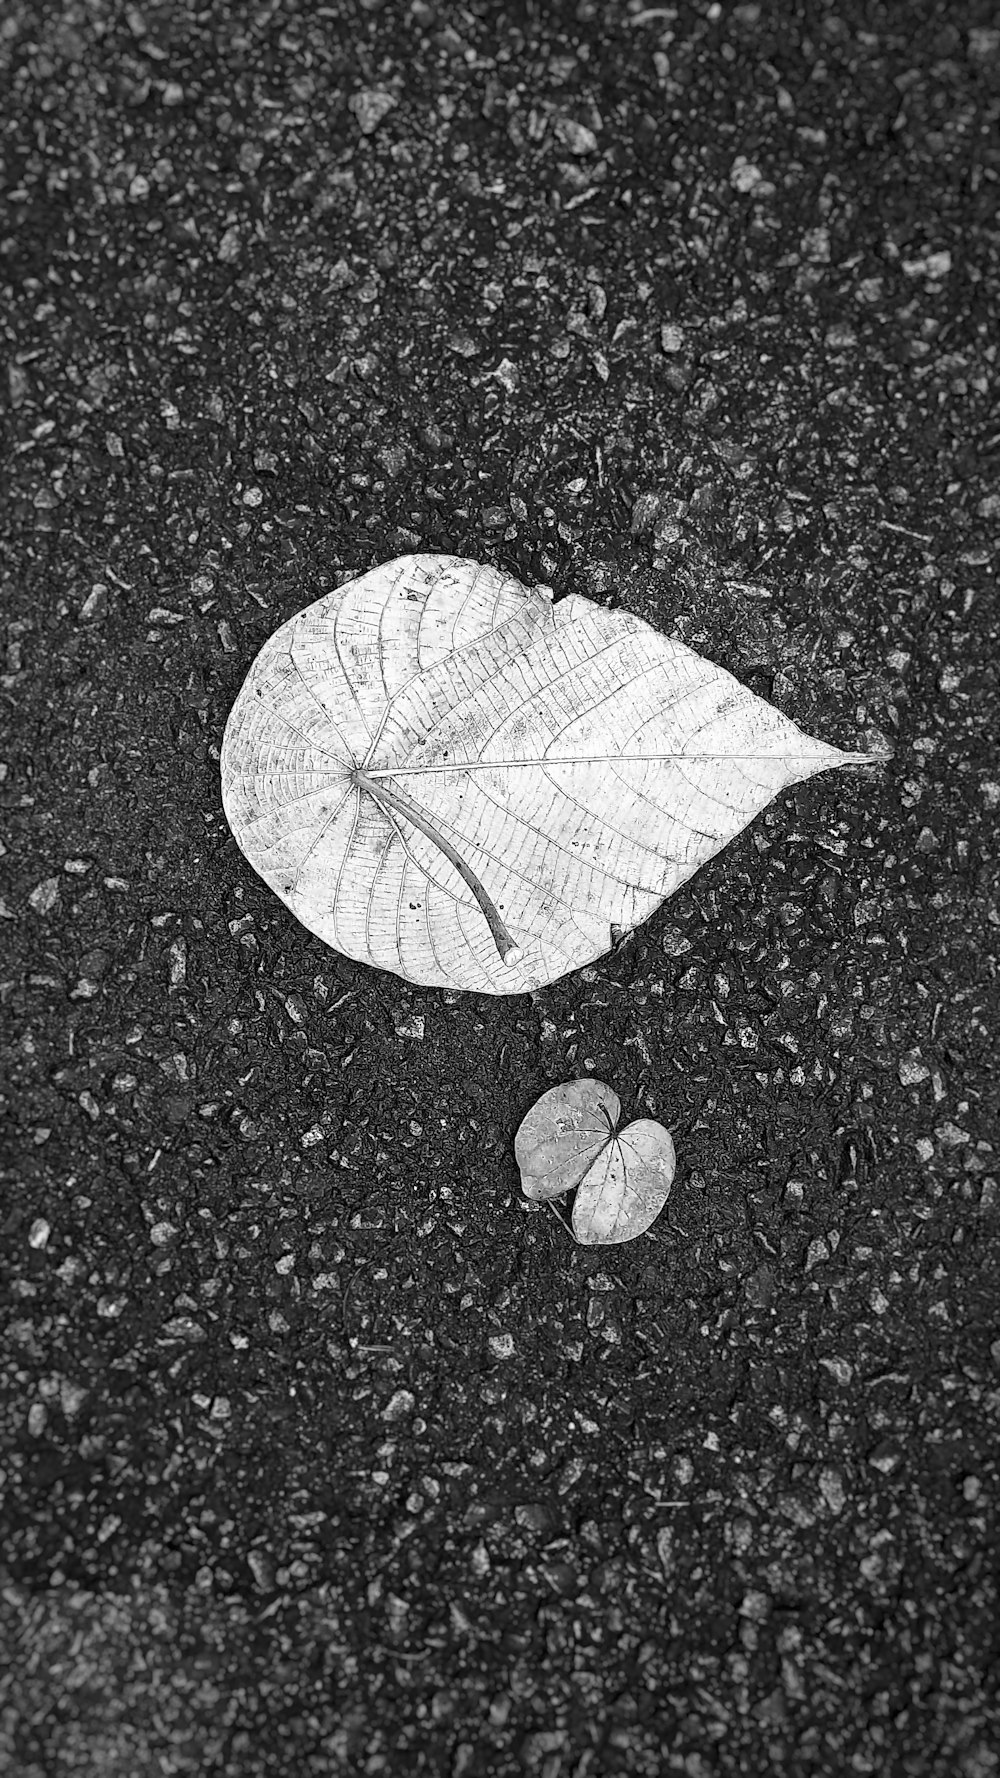 a fallen leaf on the ground next to a pair of shoes